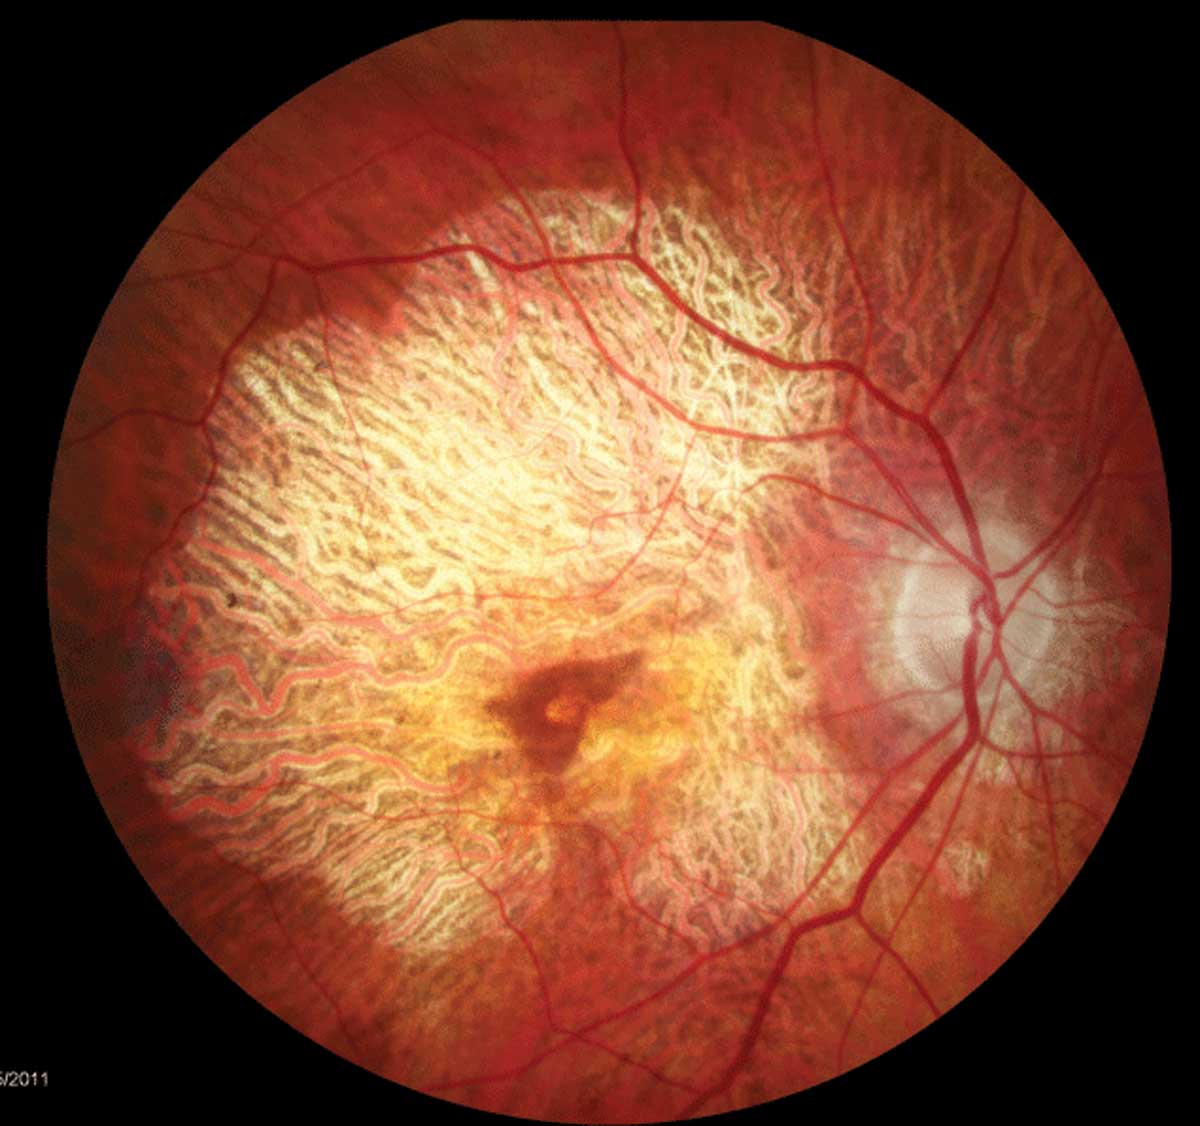 The MDS test may be useful for evaluating contrast sensitivity in patients with AMD.